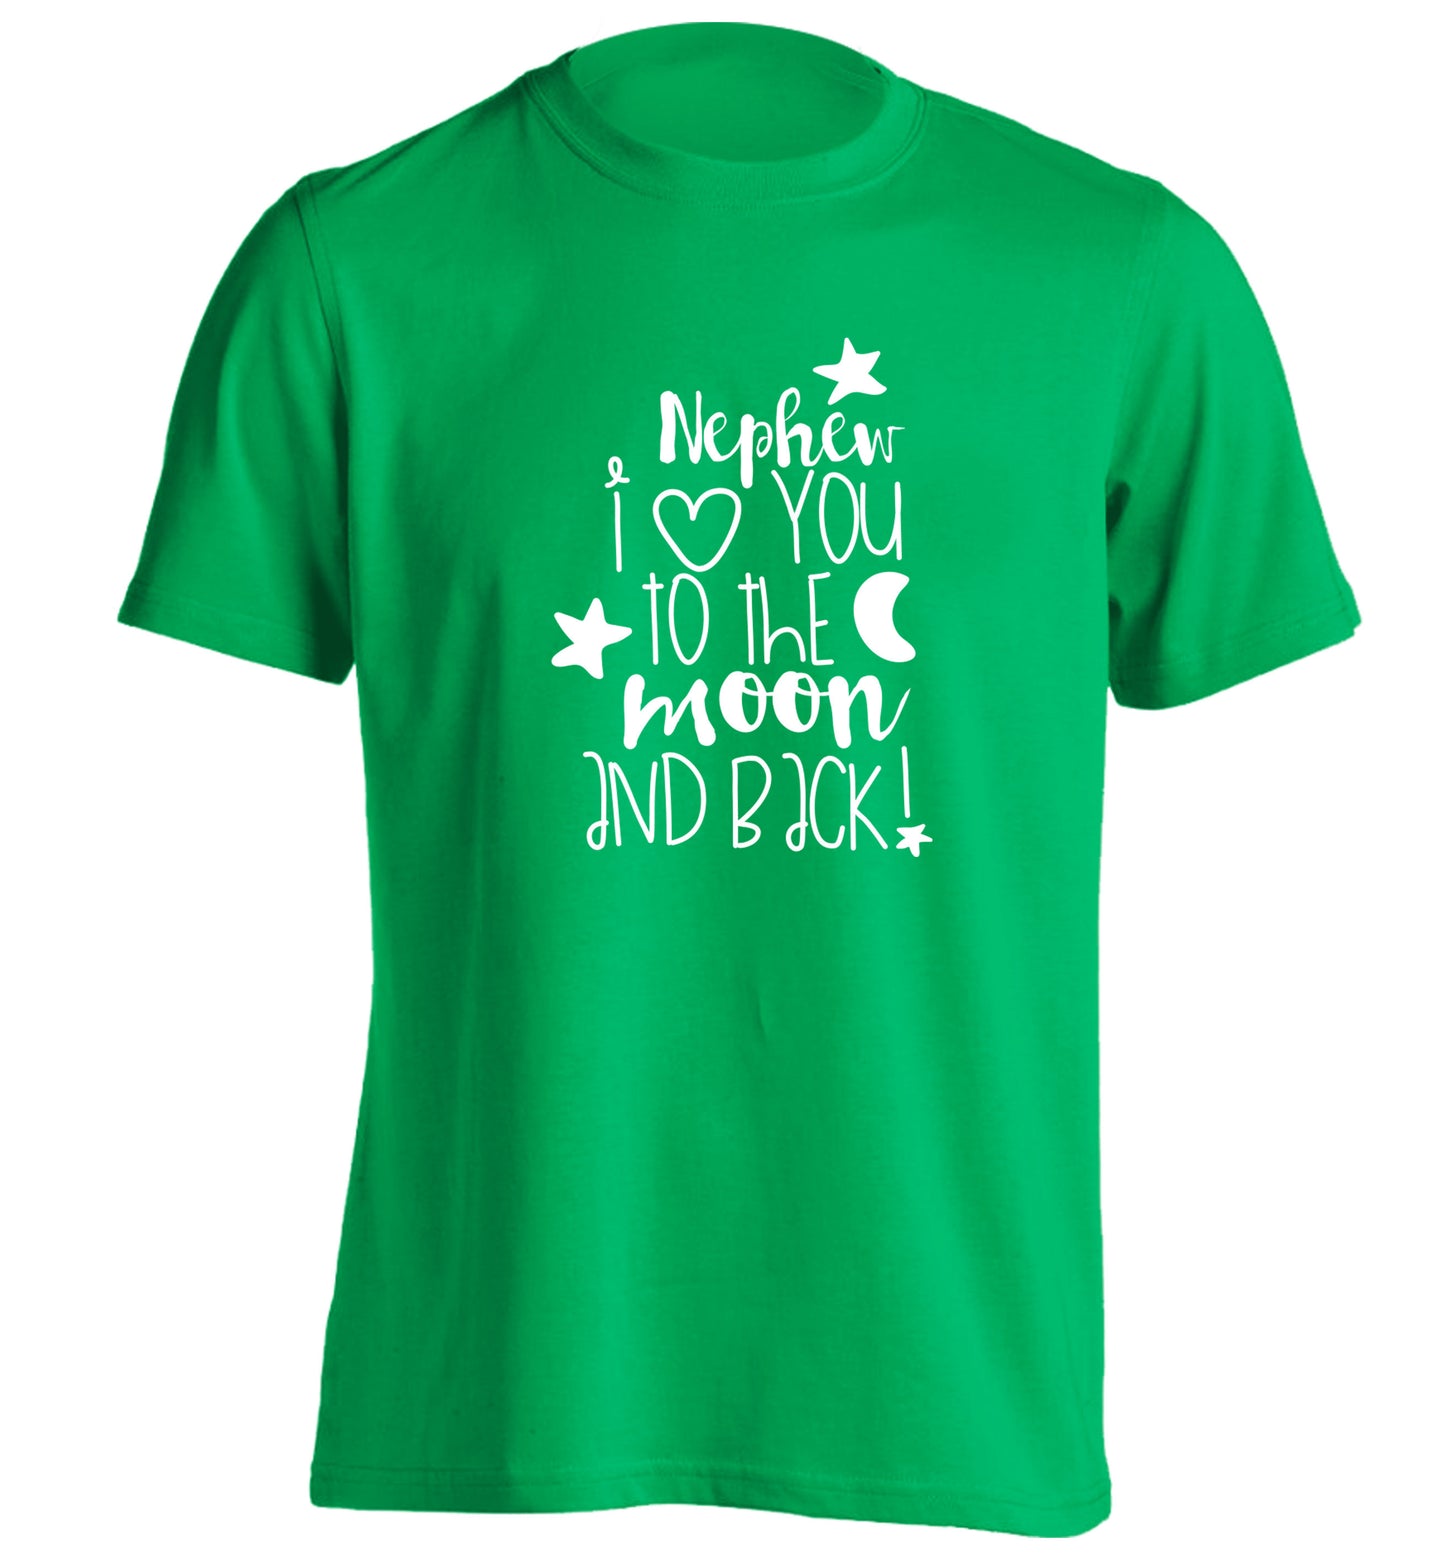 Nephew I love you to the moon and back adults unisex green Tshirt 2XL